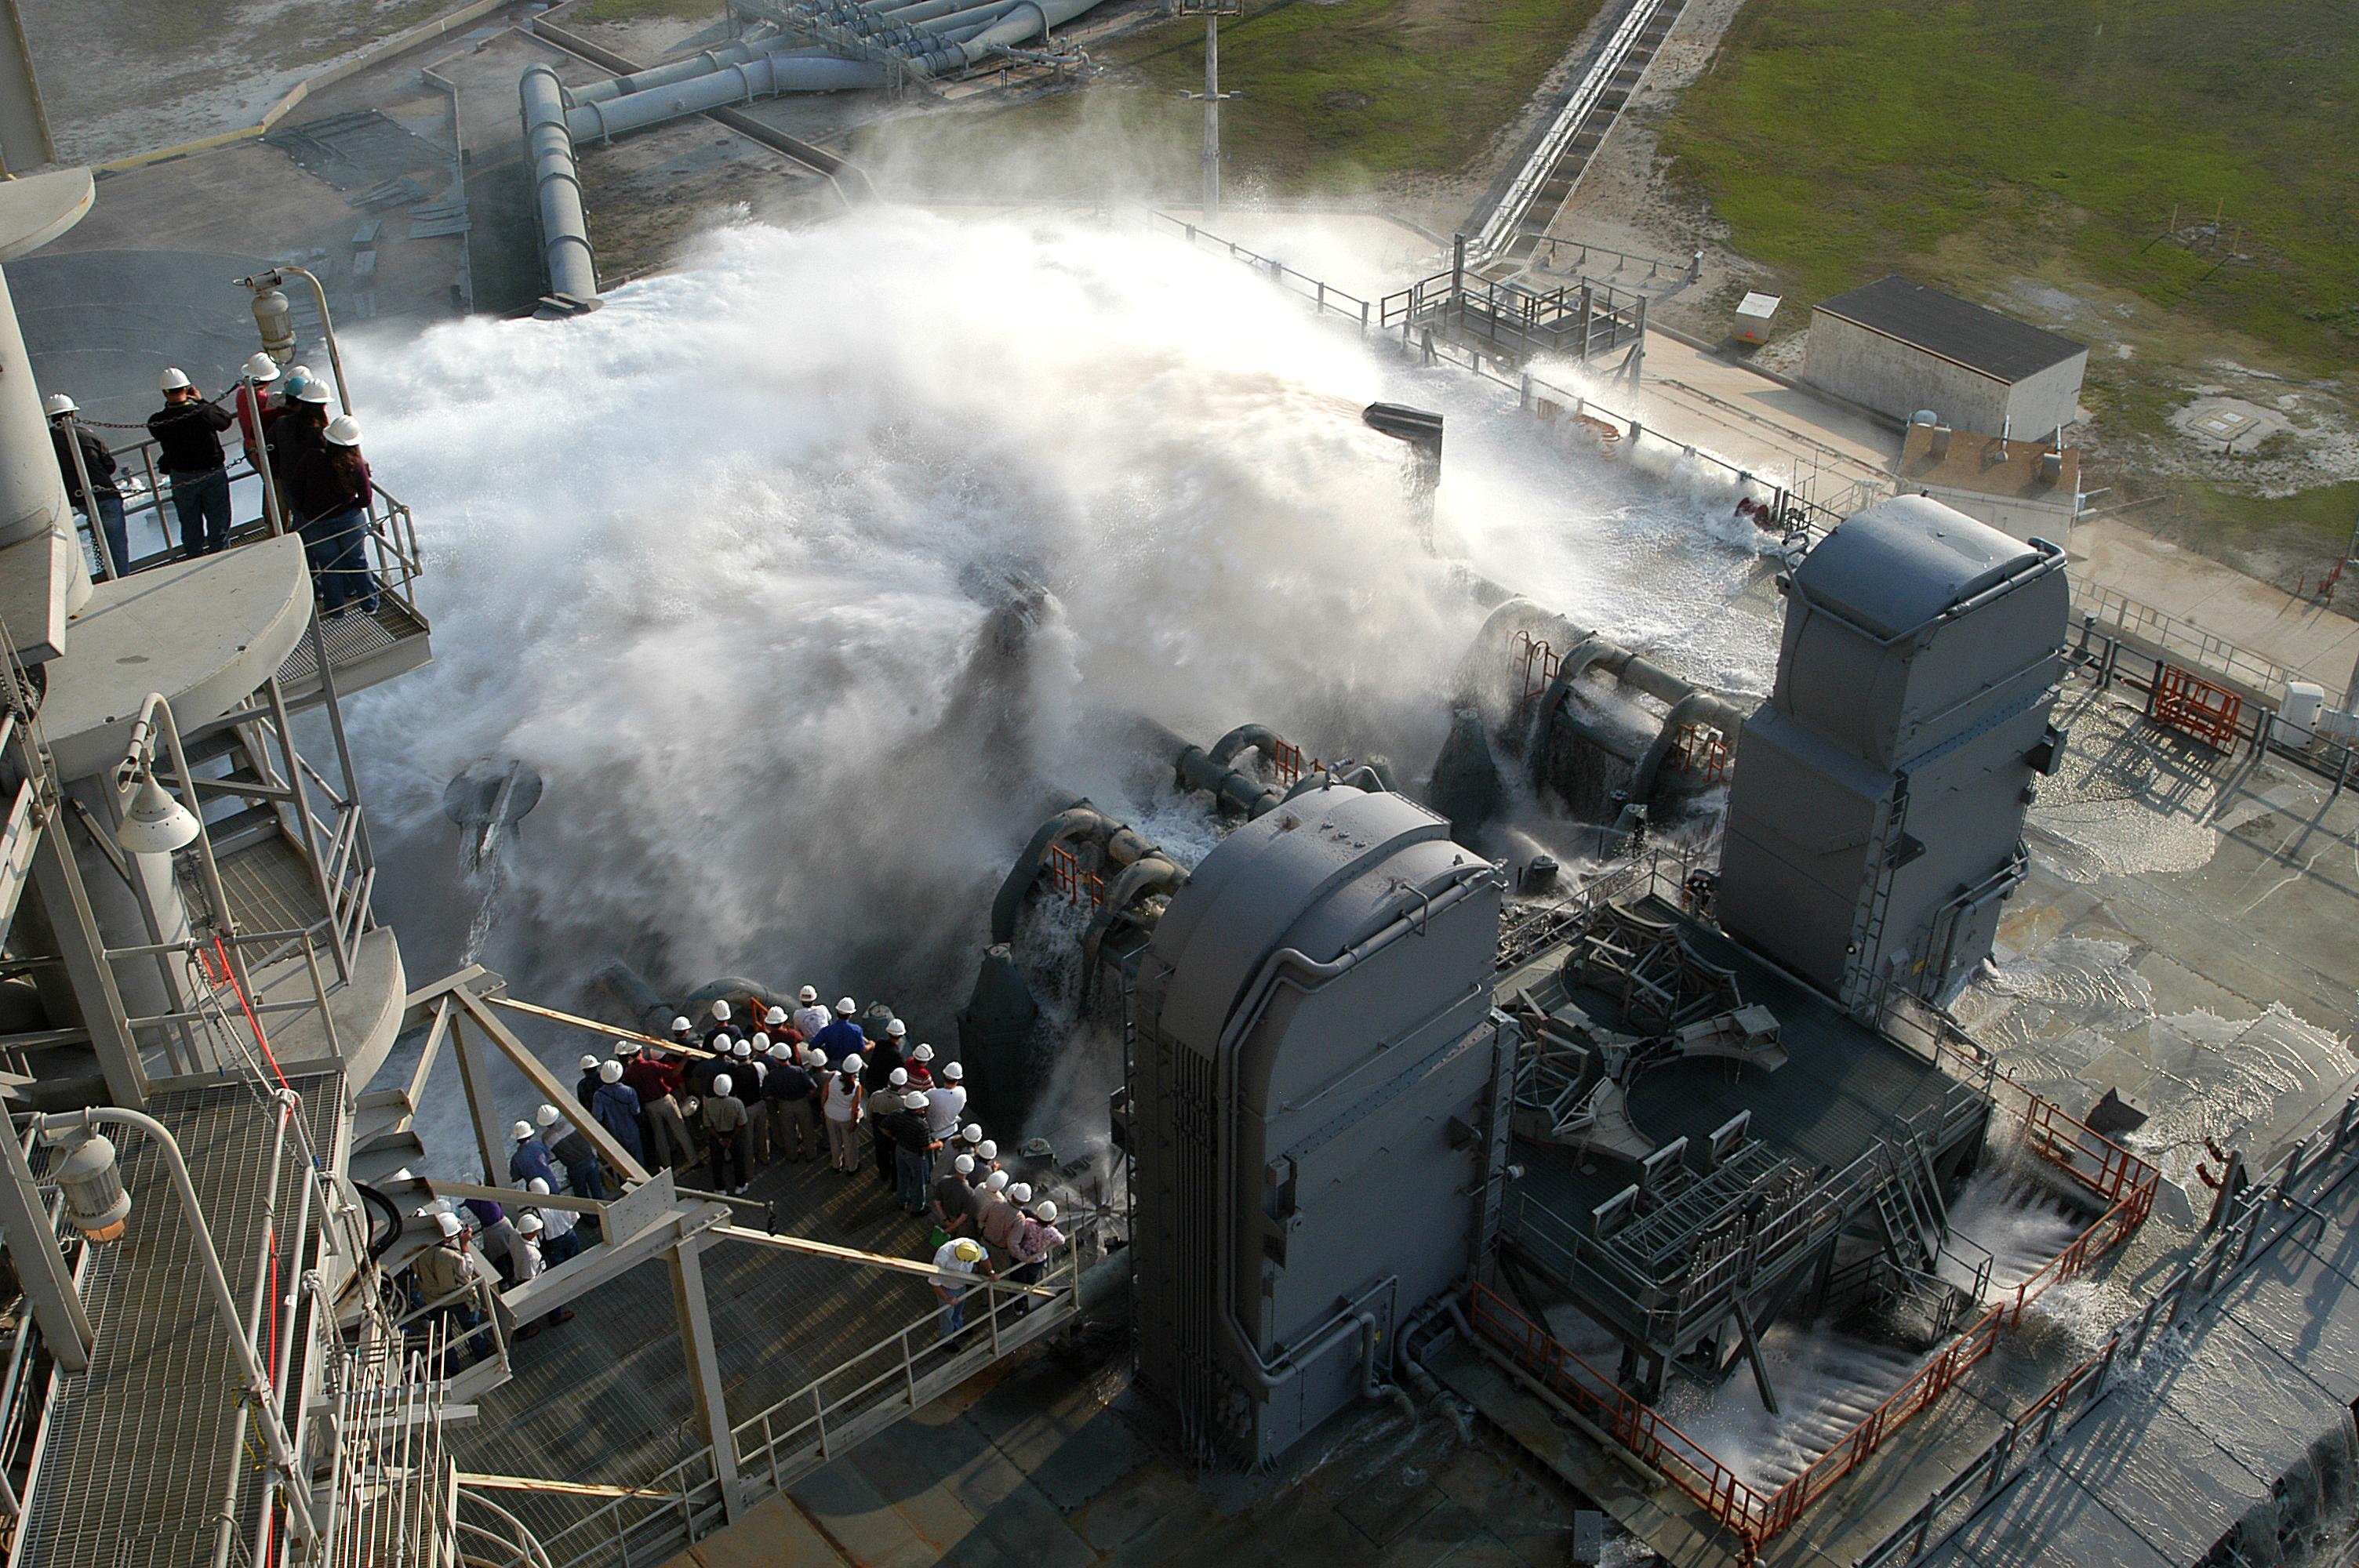 Sound_suppression_water_system_test_at_KSC_Launch_Pad_39A.jpg